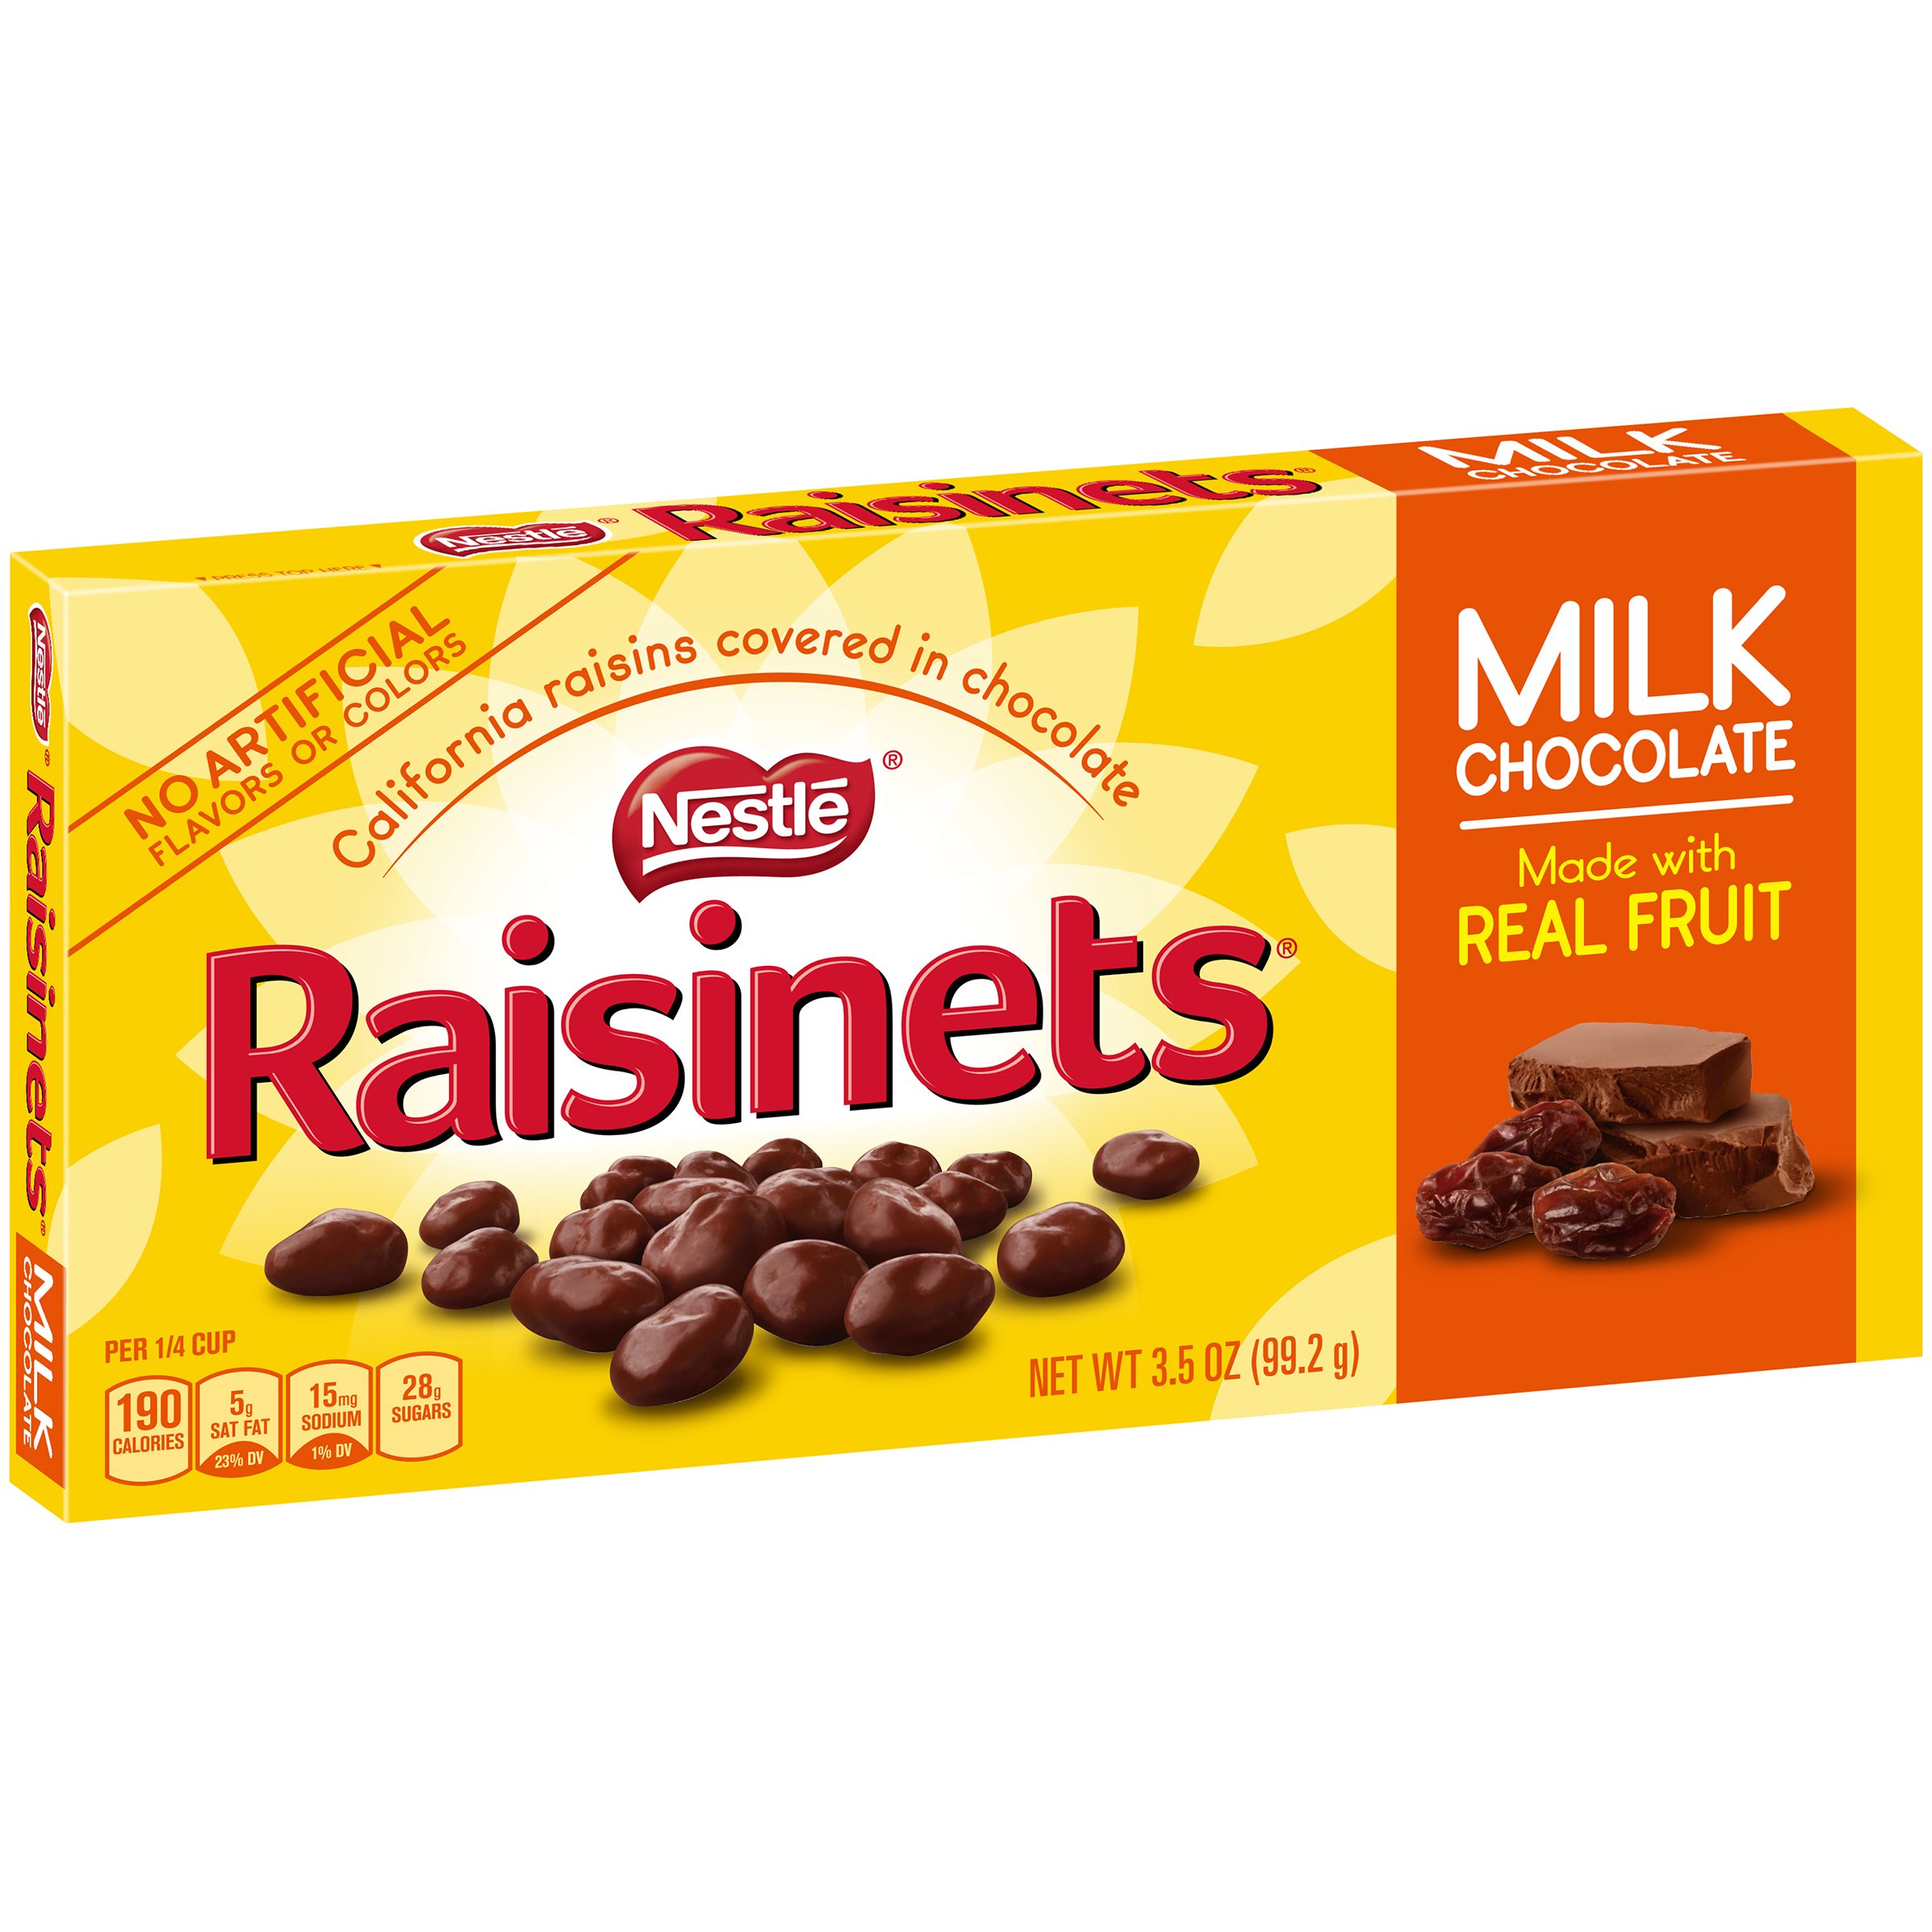 Are Chocolate Raisins Bad For You